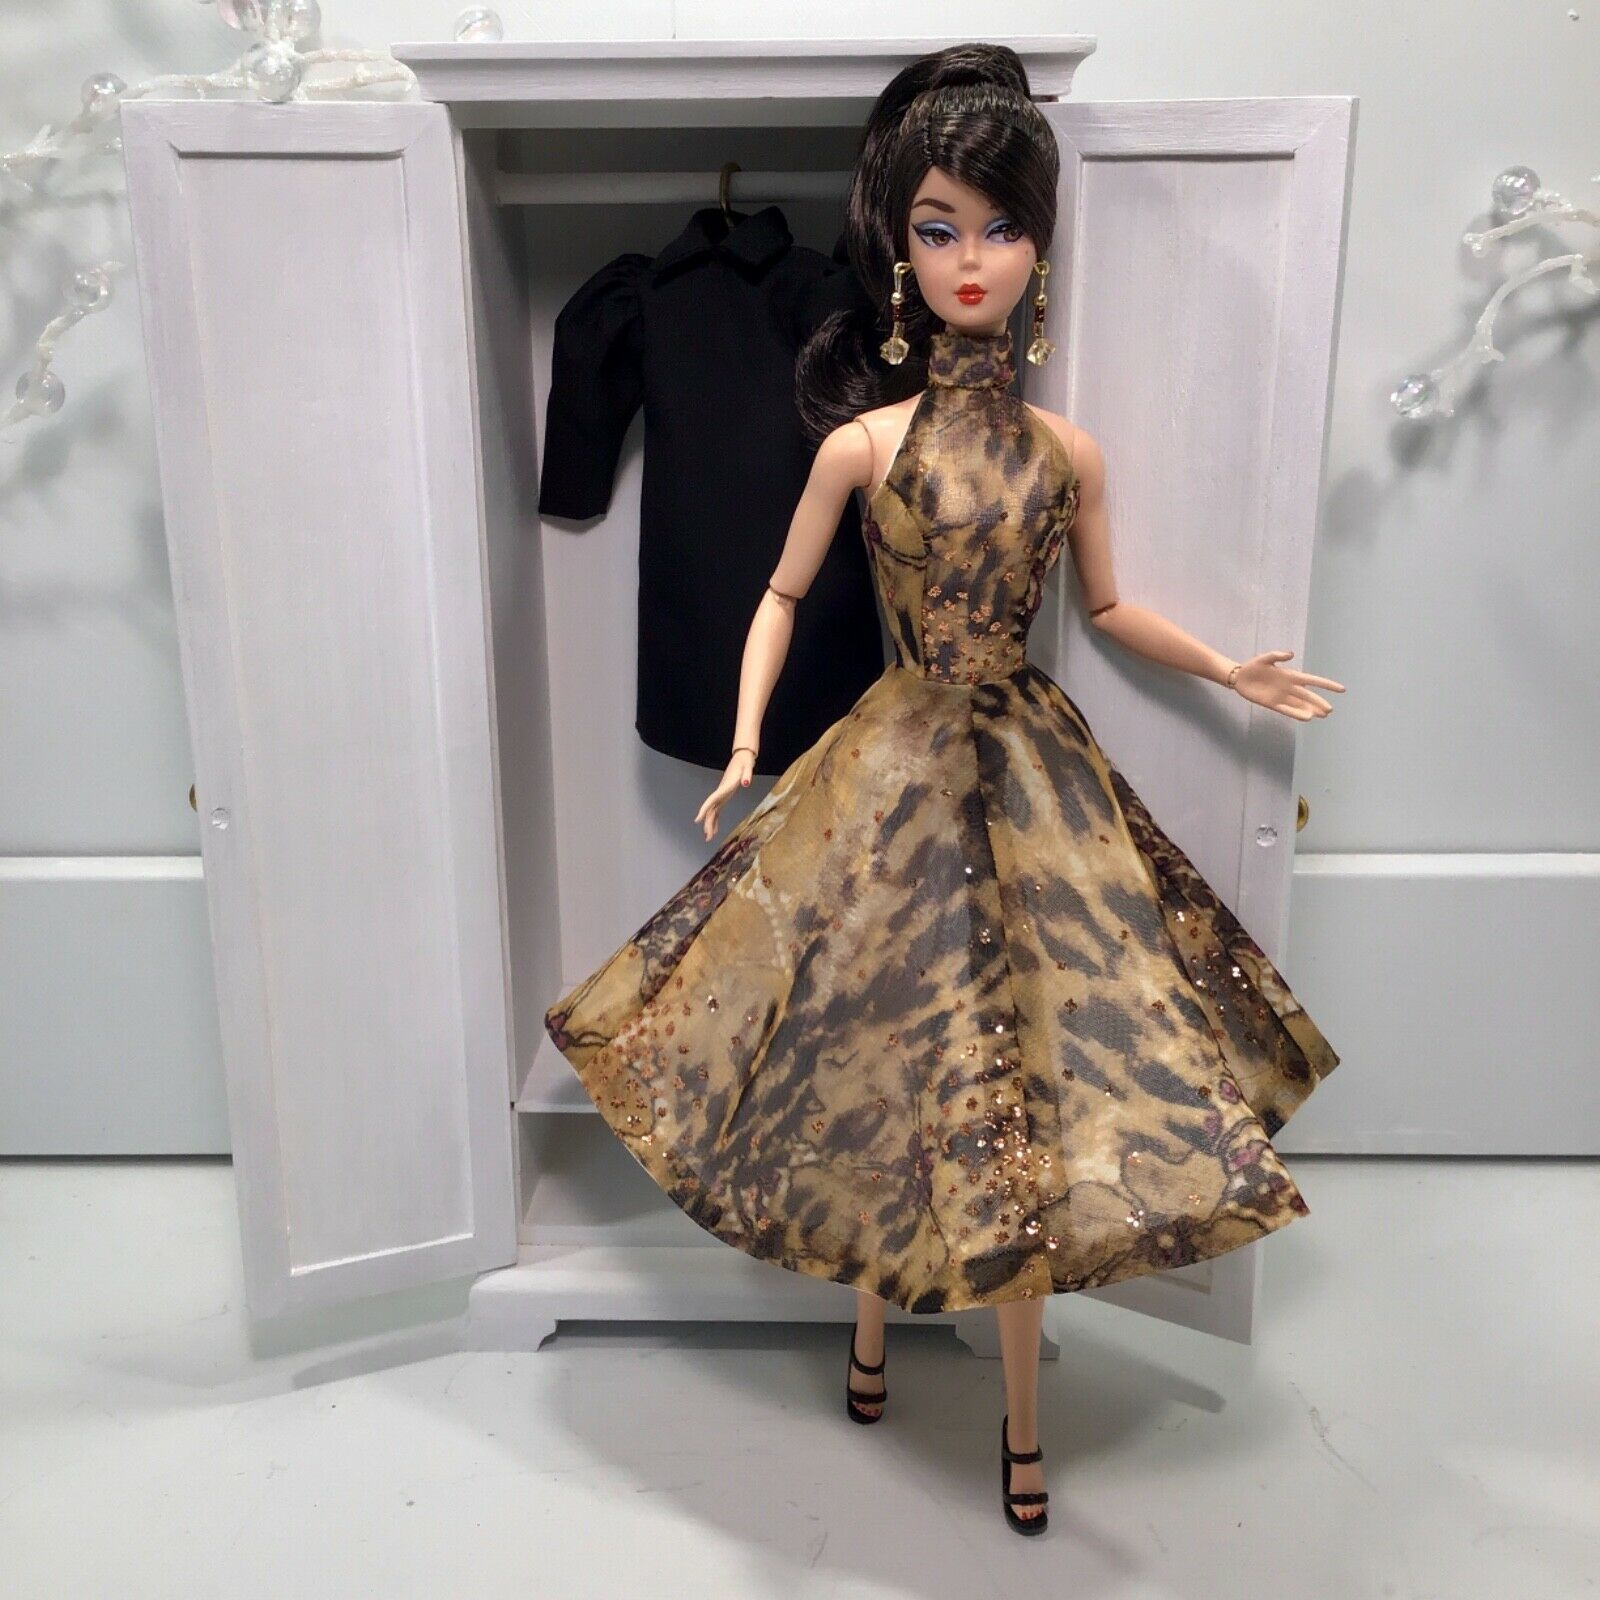 Mixed Lot Dresses, Jewelry, Shoes For Silkstone Barbie: Handmade & Best In Black